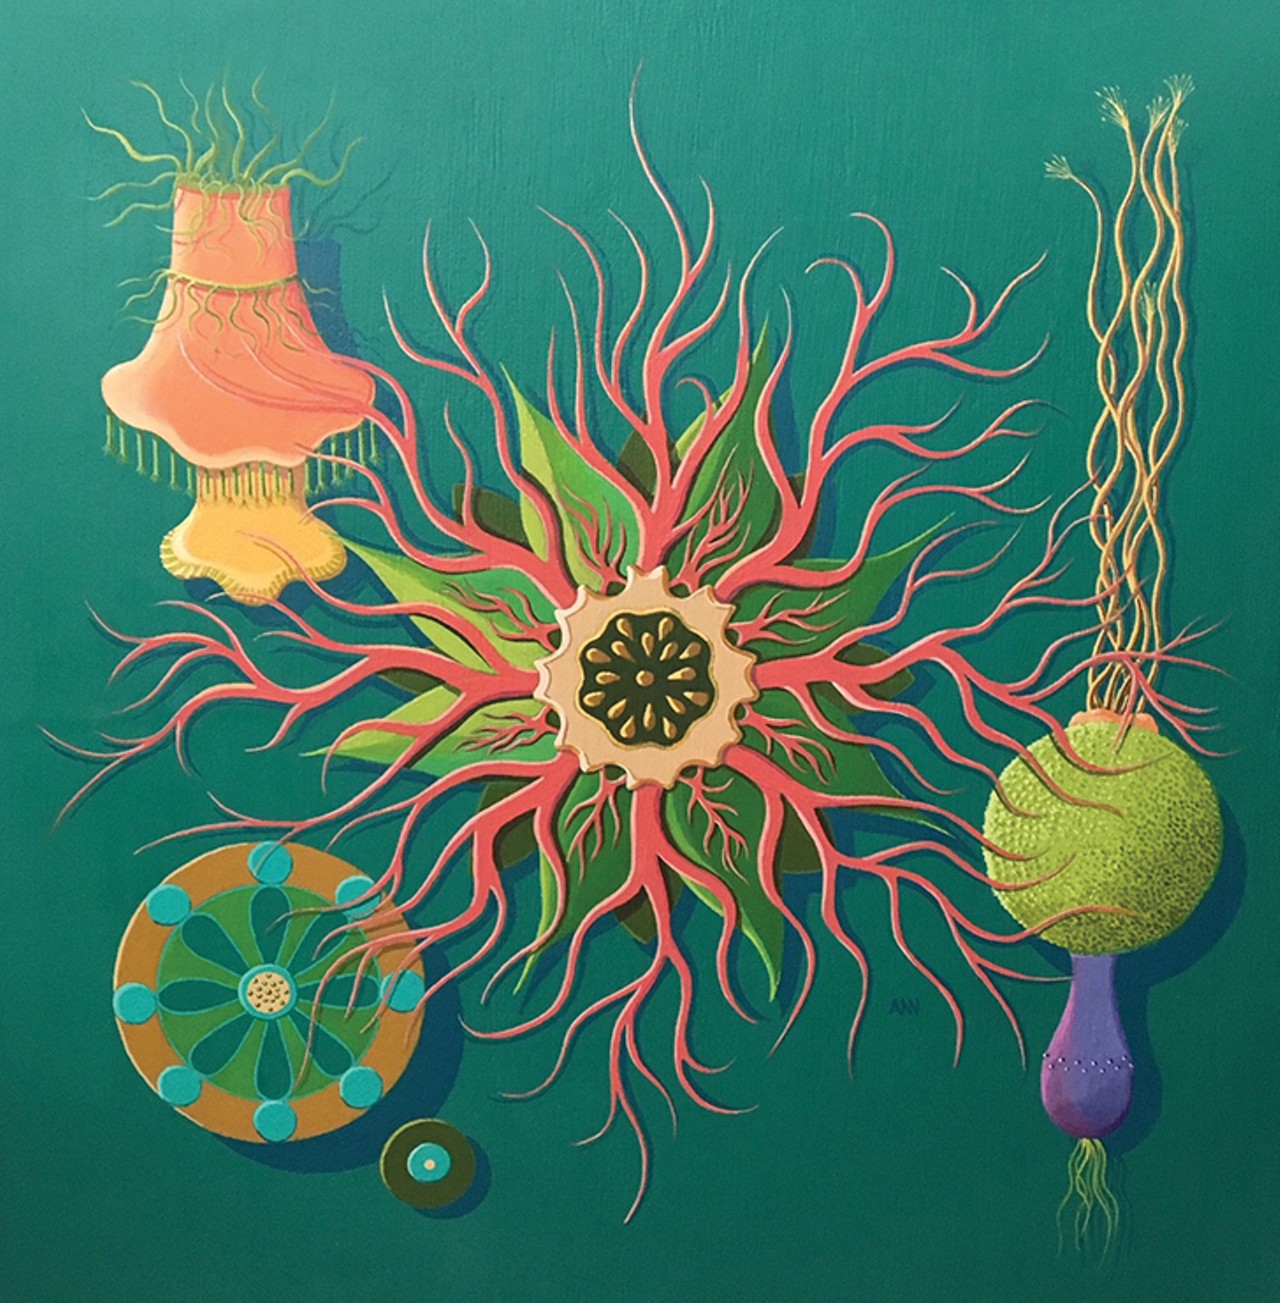 Ann Feldshue's "Roots" depicts a variety of fictitious amoeba-like creatures inspired by Darwin-era scientific illustrations. Feldshue's paintings are on display through Dec. 23 as part of the Dunedin Fine Art Center's Bontanamoeba exhibition.
Photo courtesy of the Dunedin Fine Art Center